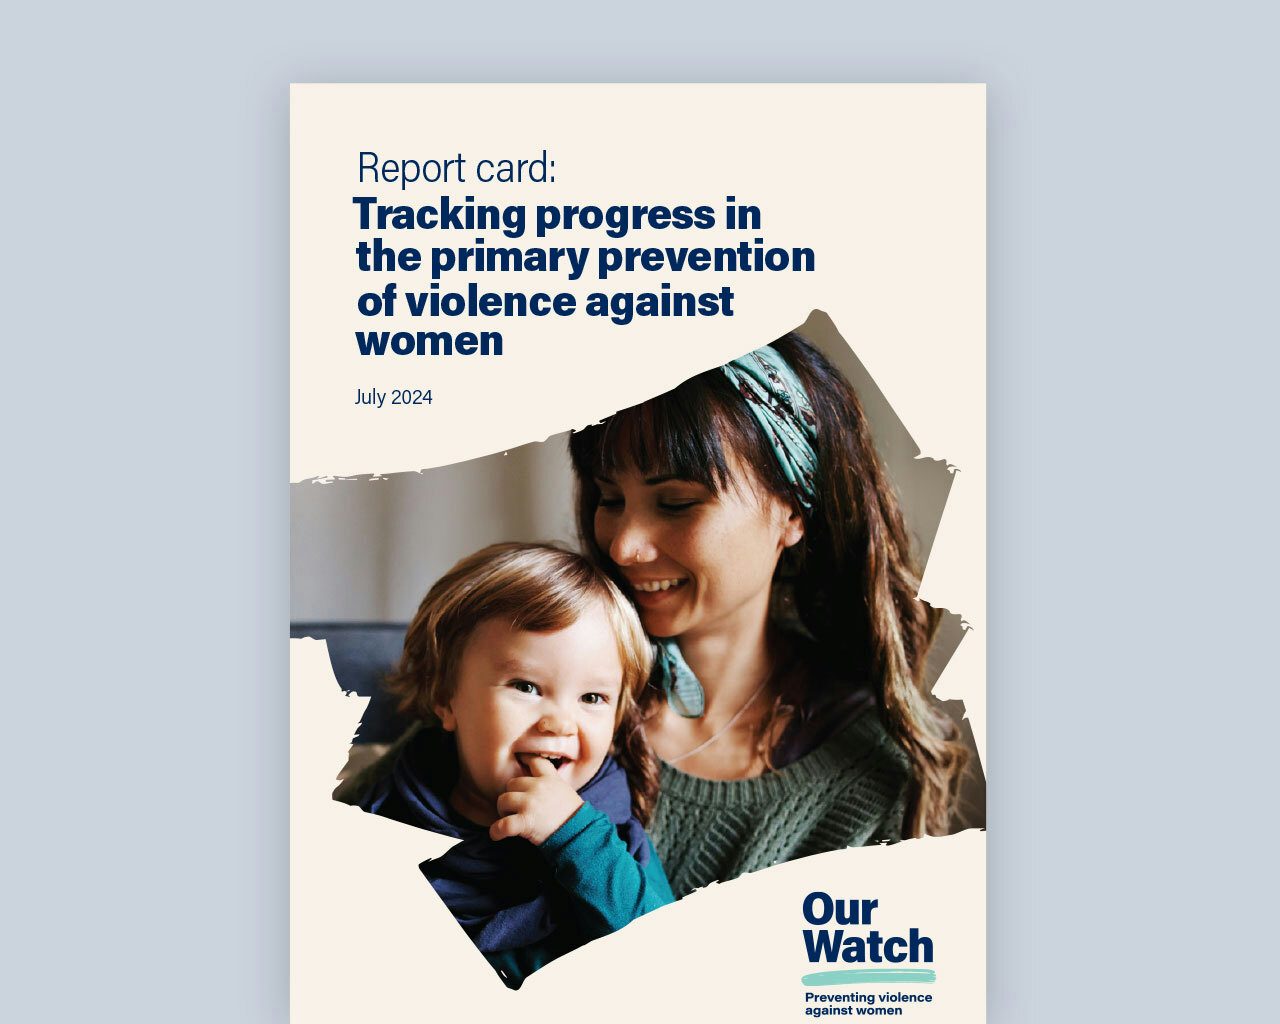 Report card: Tracking progress in the primary prevention of violence against women